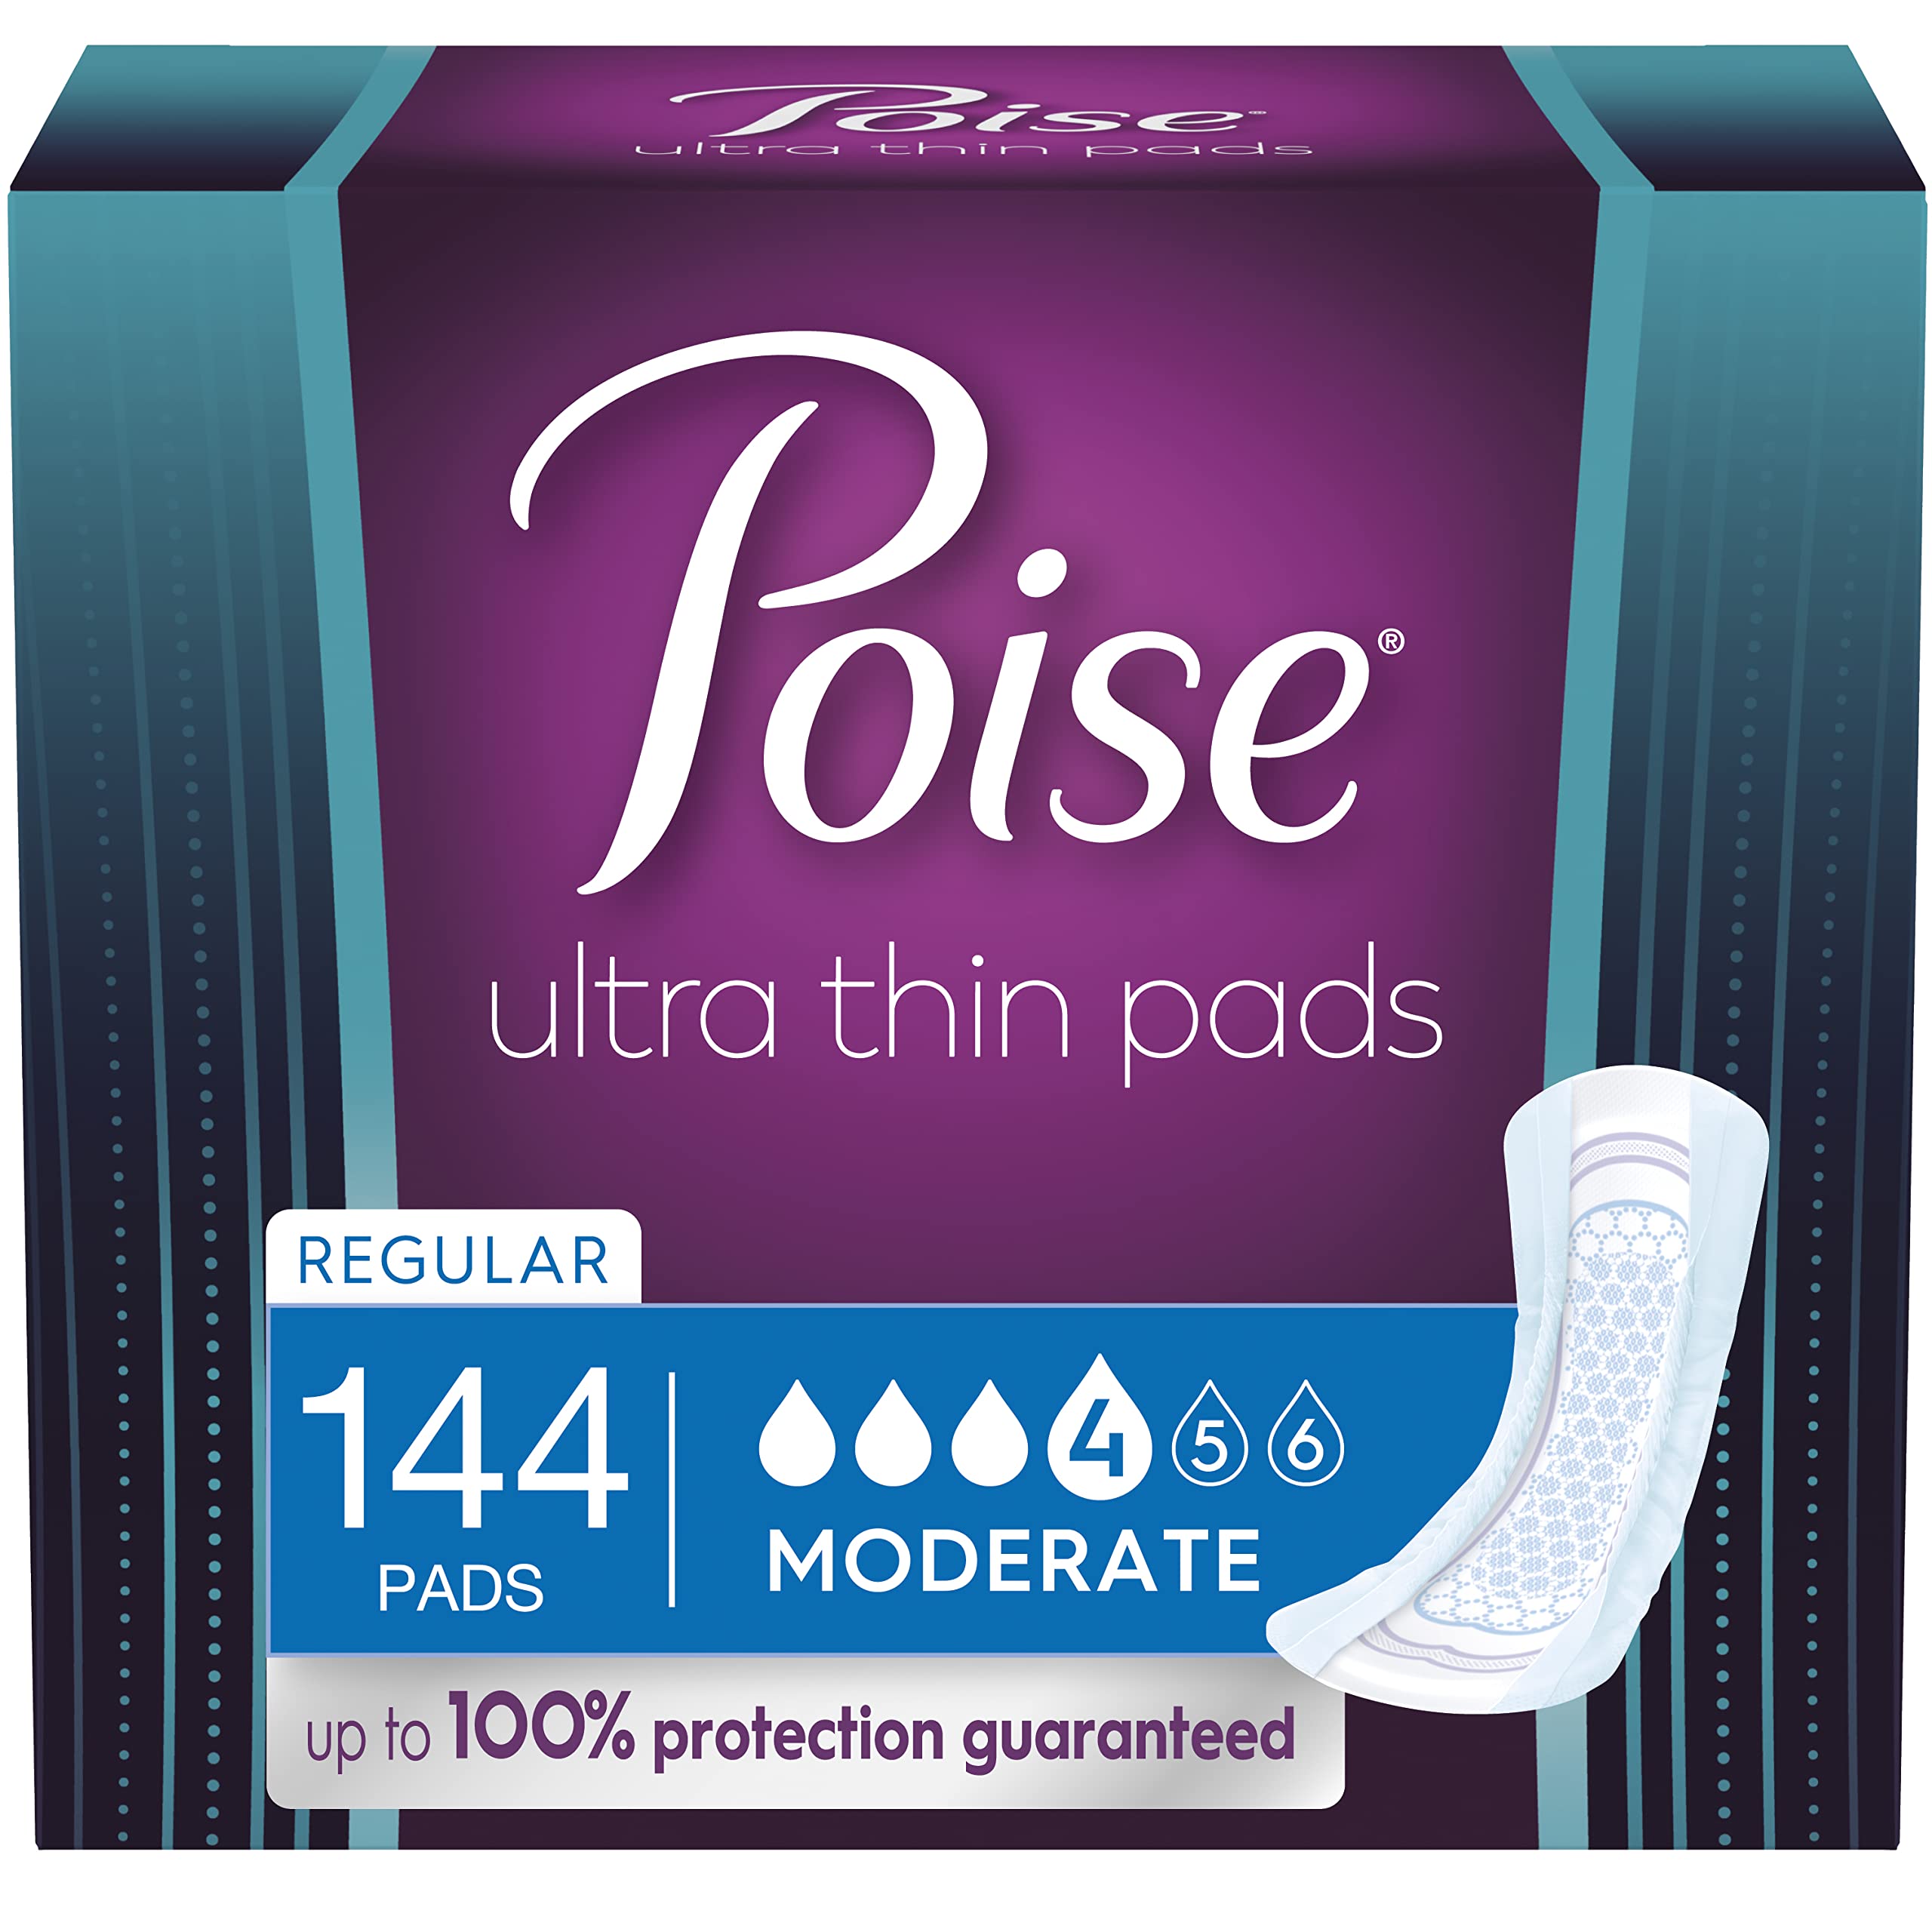 Poise Daily Liners Incontinence Liners - Very Light Absorbency - Regular -  48 Count